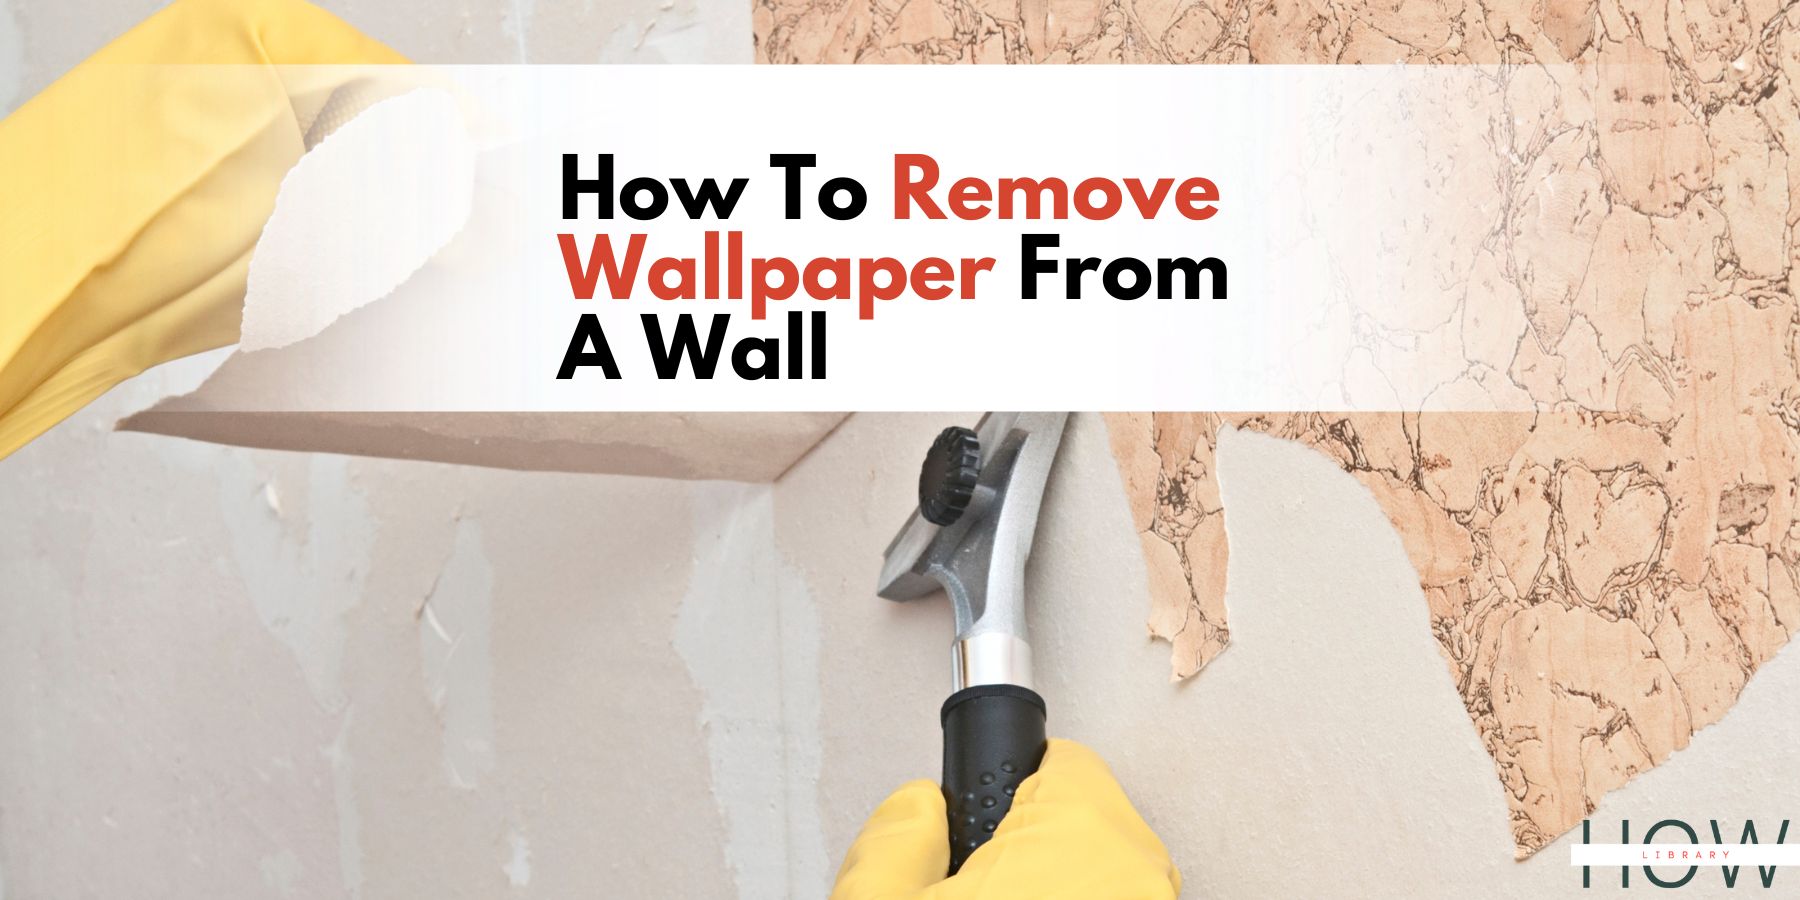 How To Remove Wallpaper - The Easiest Way To Remove Wallpapers